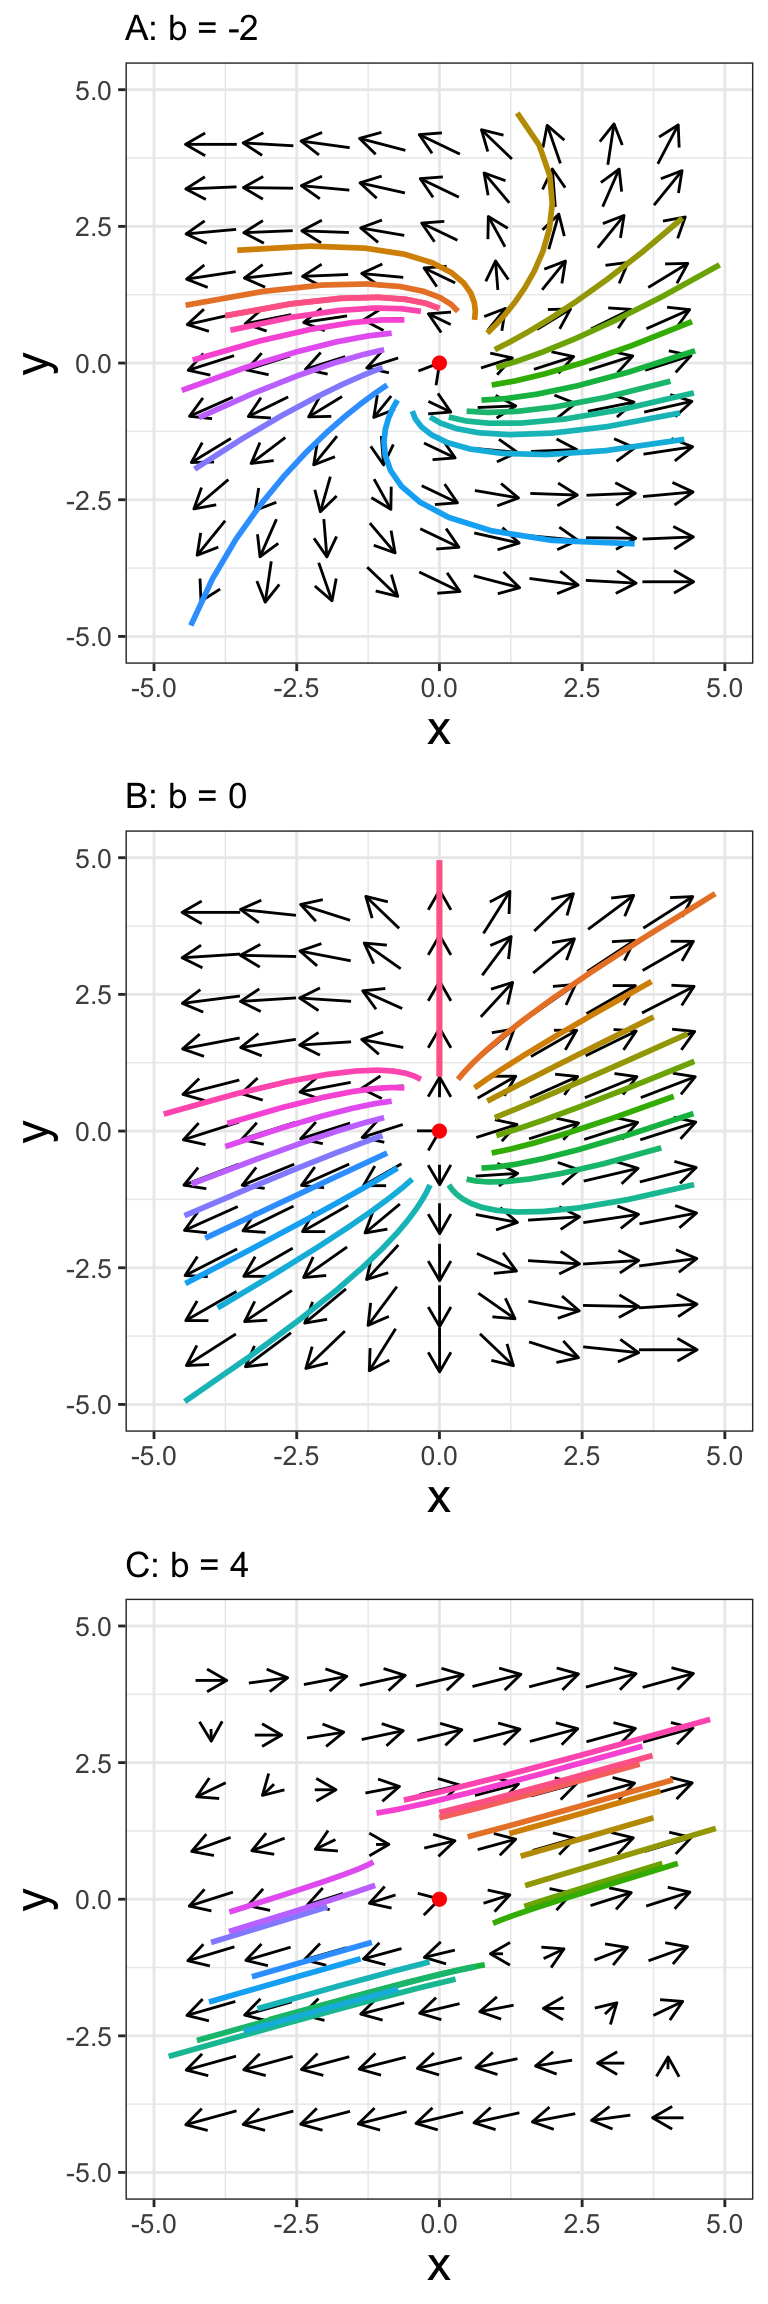 Phase planes for Equation \@ref(eq:b-bifurc-20) for different values of $b$.